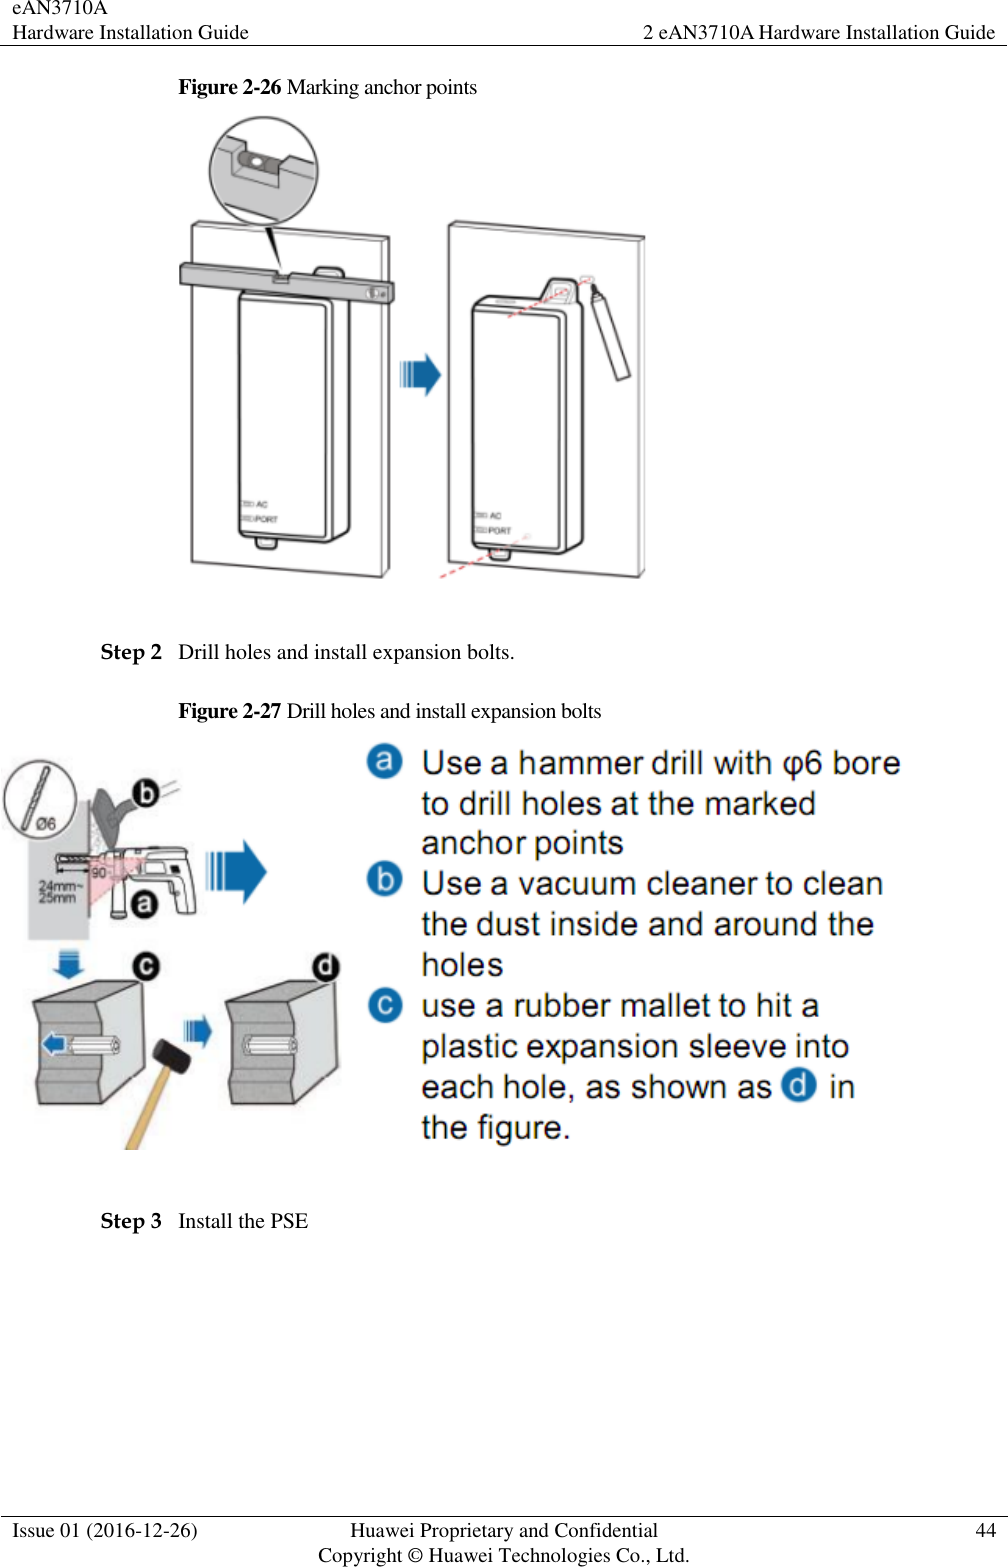 eAN3710A Hardware Installation Guide 2 eAN3710A Hardware Installation Guide  Issue 01 (2016-12-26) Huawei Proprietary and Confidential                                     Copyright © Huawei Technologies Co., Ltd. 44  Figure 2-26 Marking anchor points   Step 2 Drill holes and install expansion bolts. Figure 2-27 Drill holes and install expansion bolts   Step 3 Install the PSE 